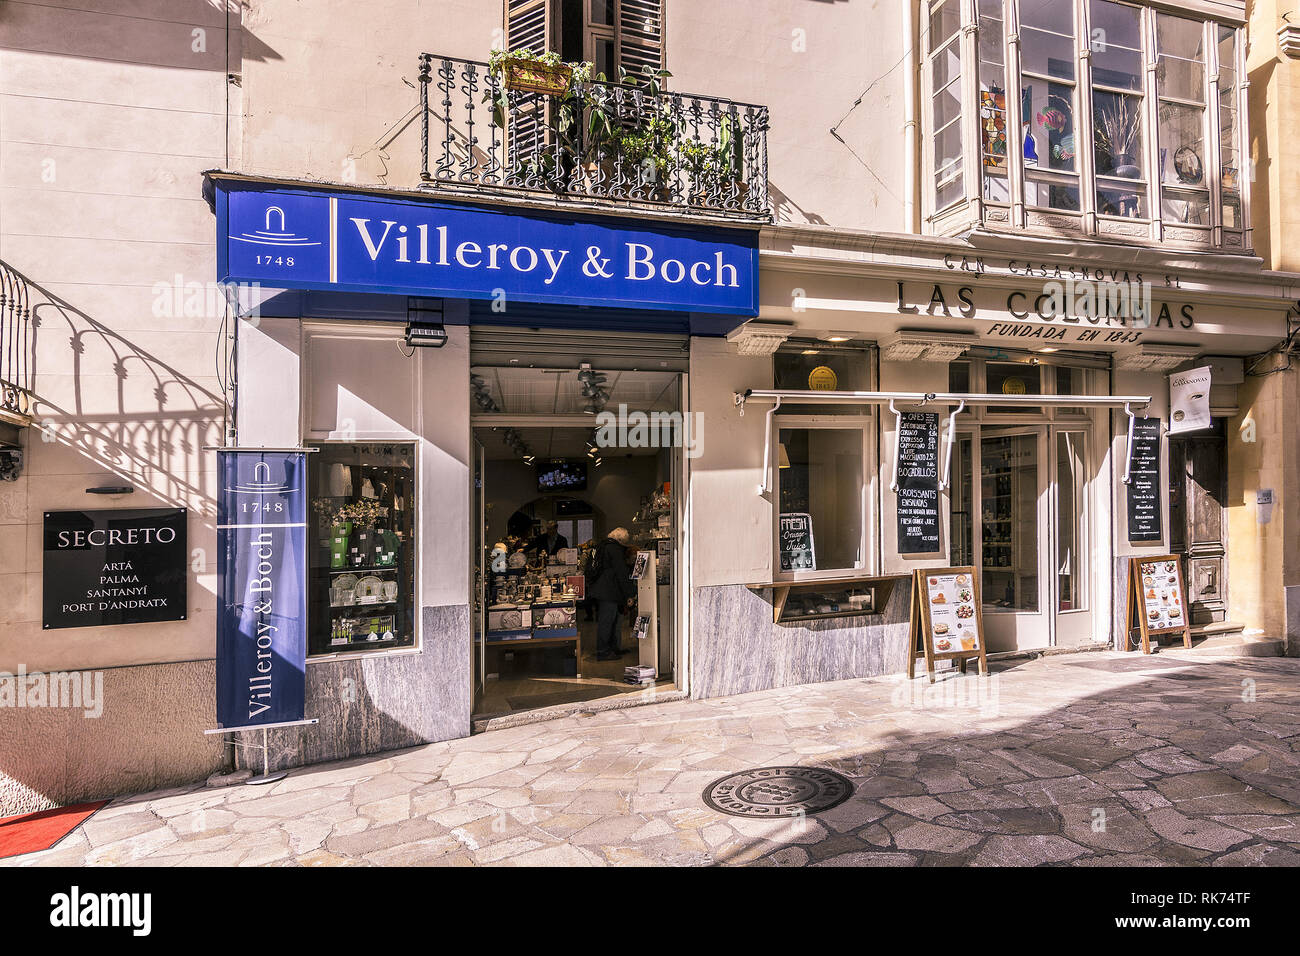 PALMA DE MALLORCA, SPAIN - FEBRUARY 9, 2019: Villeroy Boch storefron on a quiet street in Old Town on February 9, 2019 in Palma de Mallorca, Spain. Stock Photo